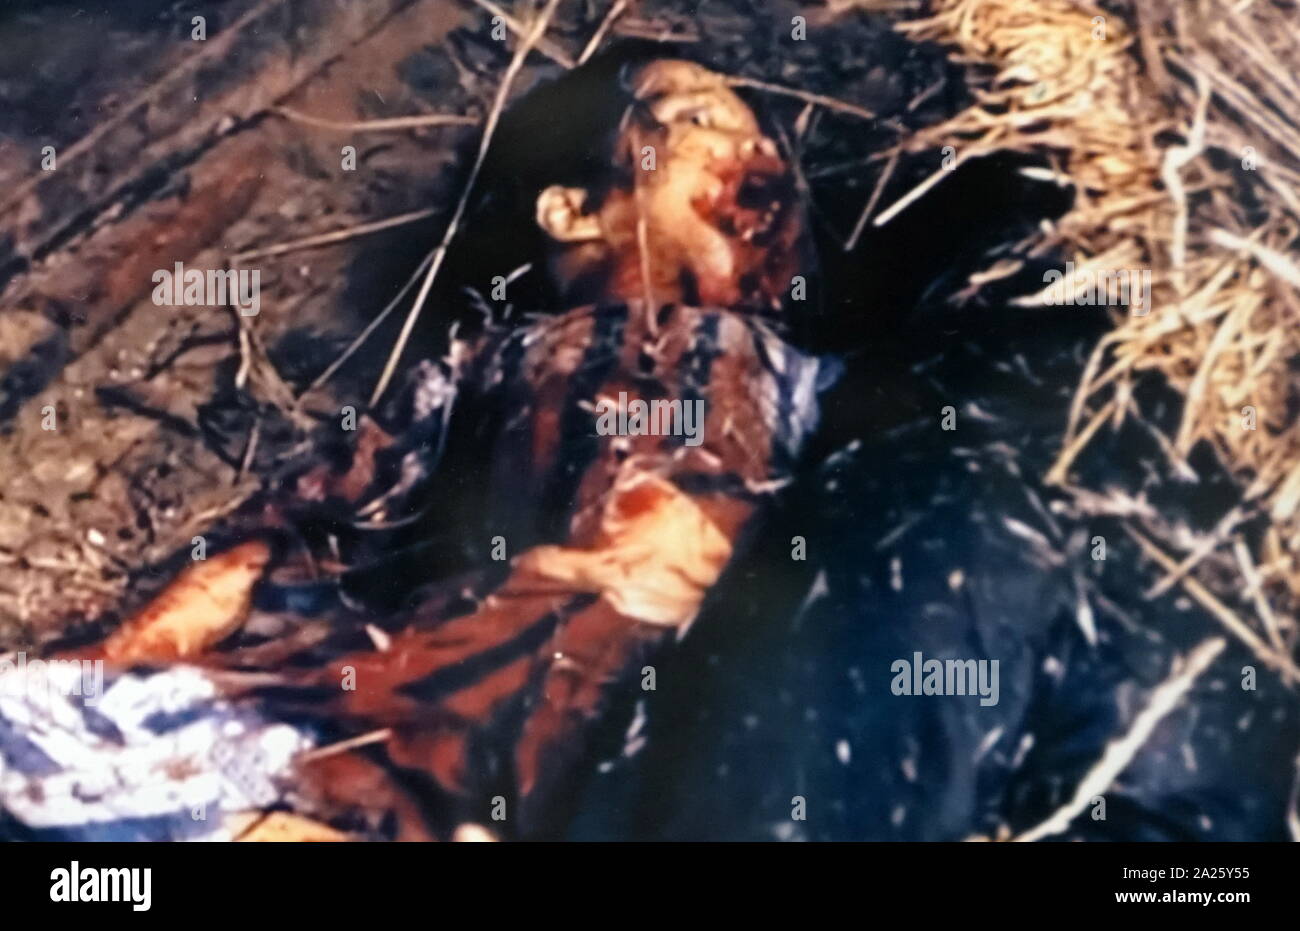 Photograph showing victims of the My Lai Massacre - the mass murder of  unarmed South Vietnamese civilians by U.S. troops during the Vietnam War  Stock Photo - Alamy